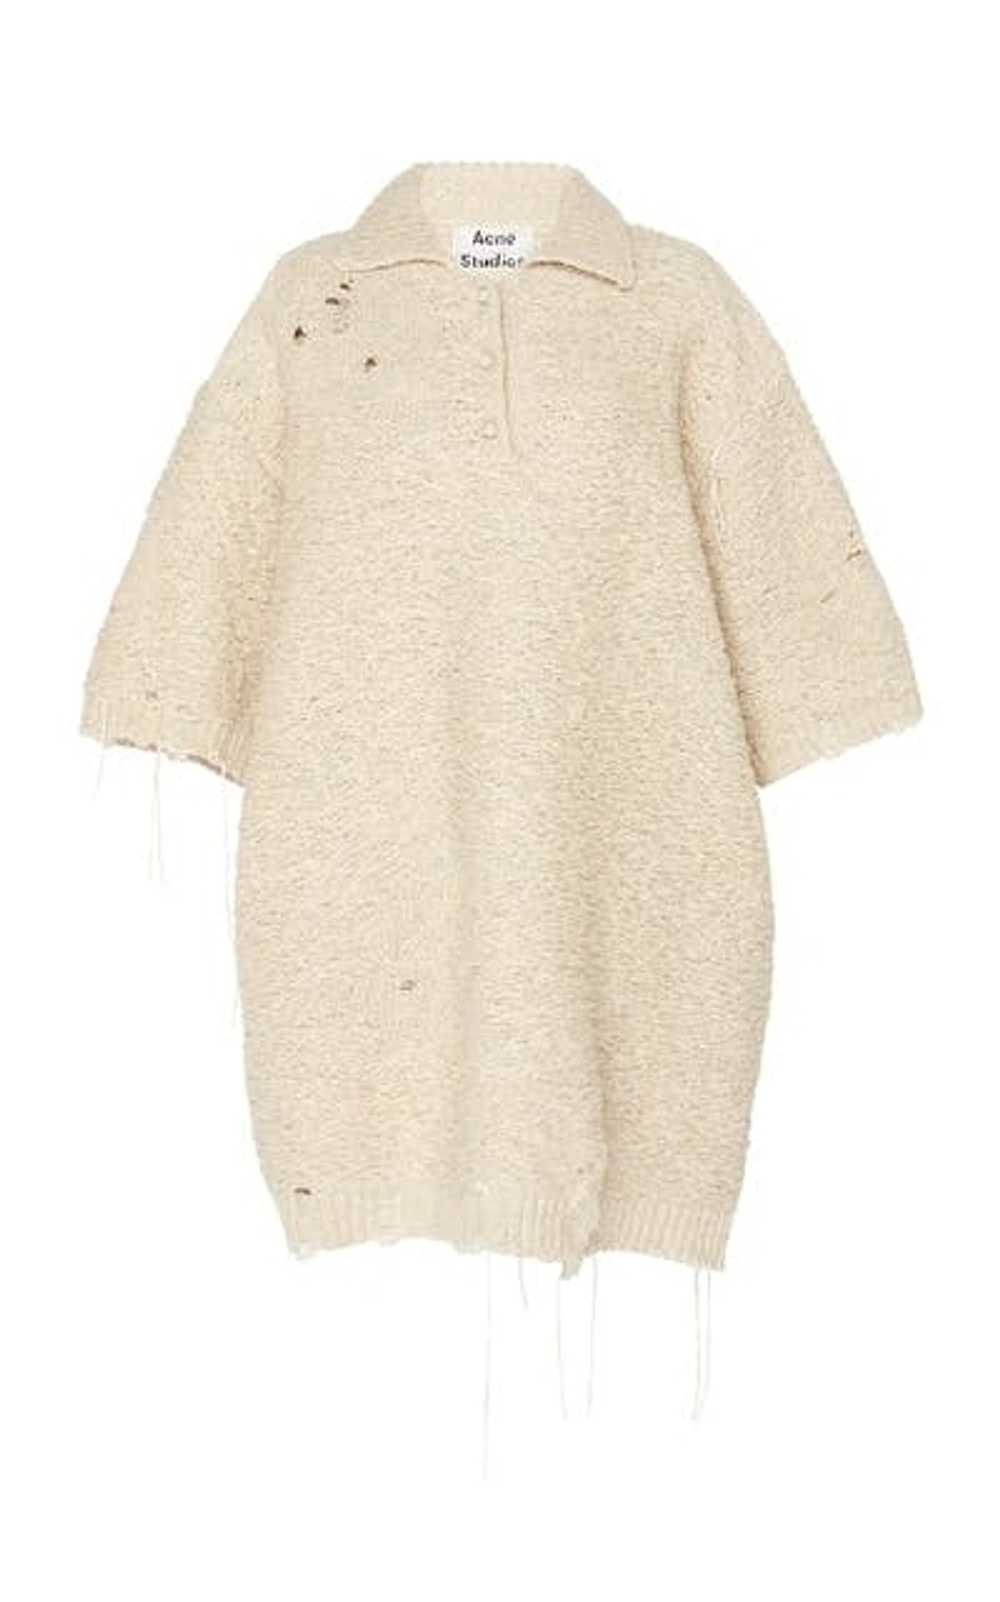 Acne Studios Oversized Distressed Wool Polo Shirt - image 1